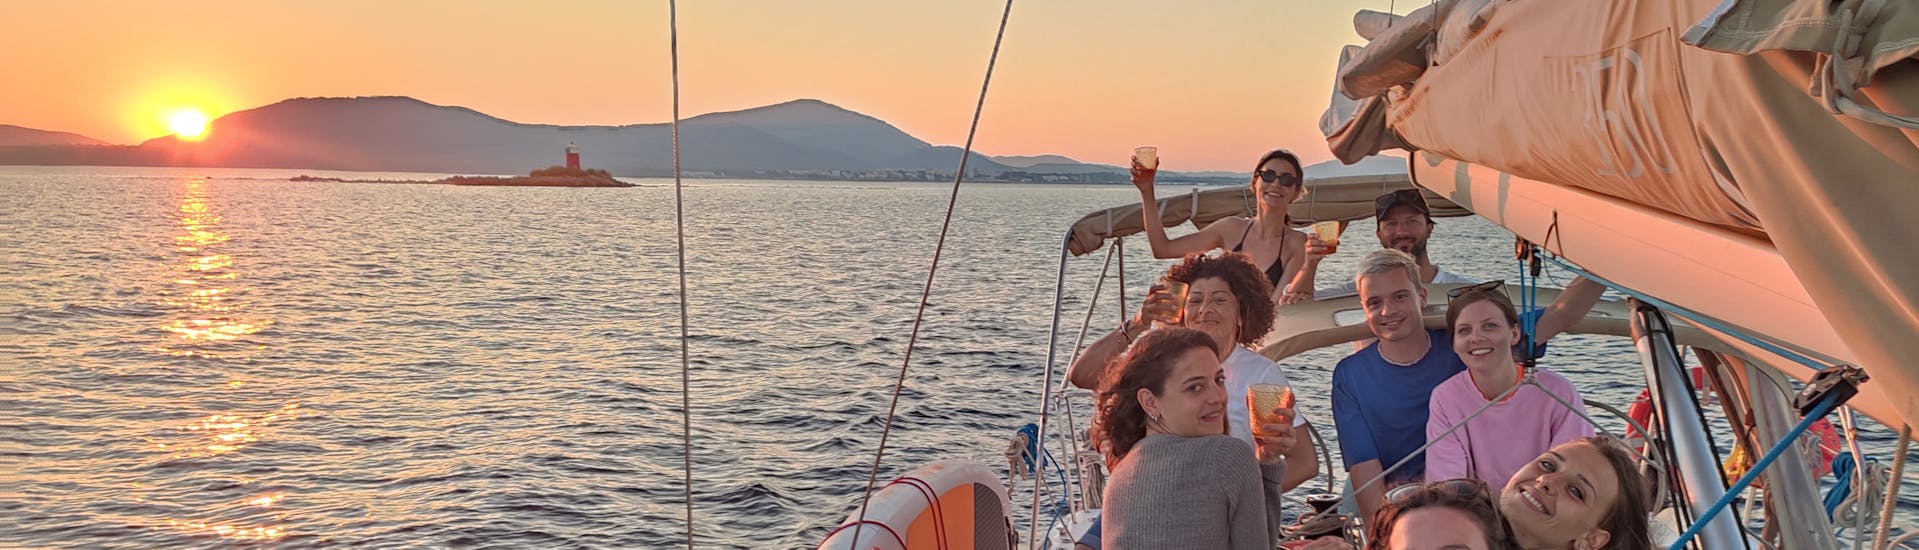 People enjoying the Sunset Private Sailing Boat Trip around Alghero with Apéritif with Cruise Sail Charter Alghero.